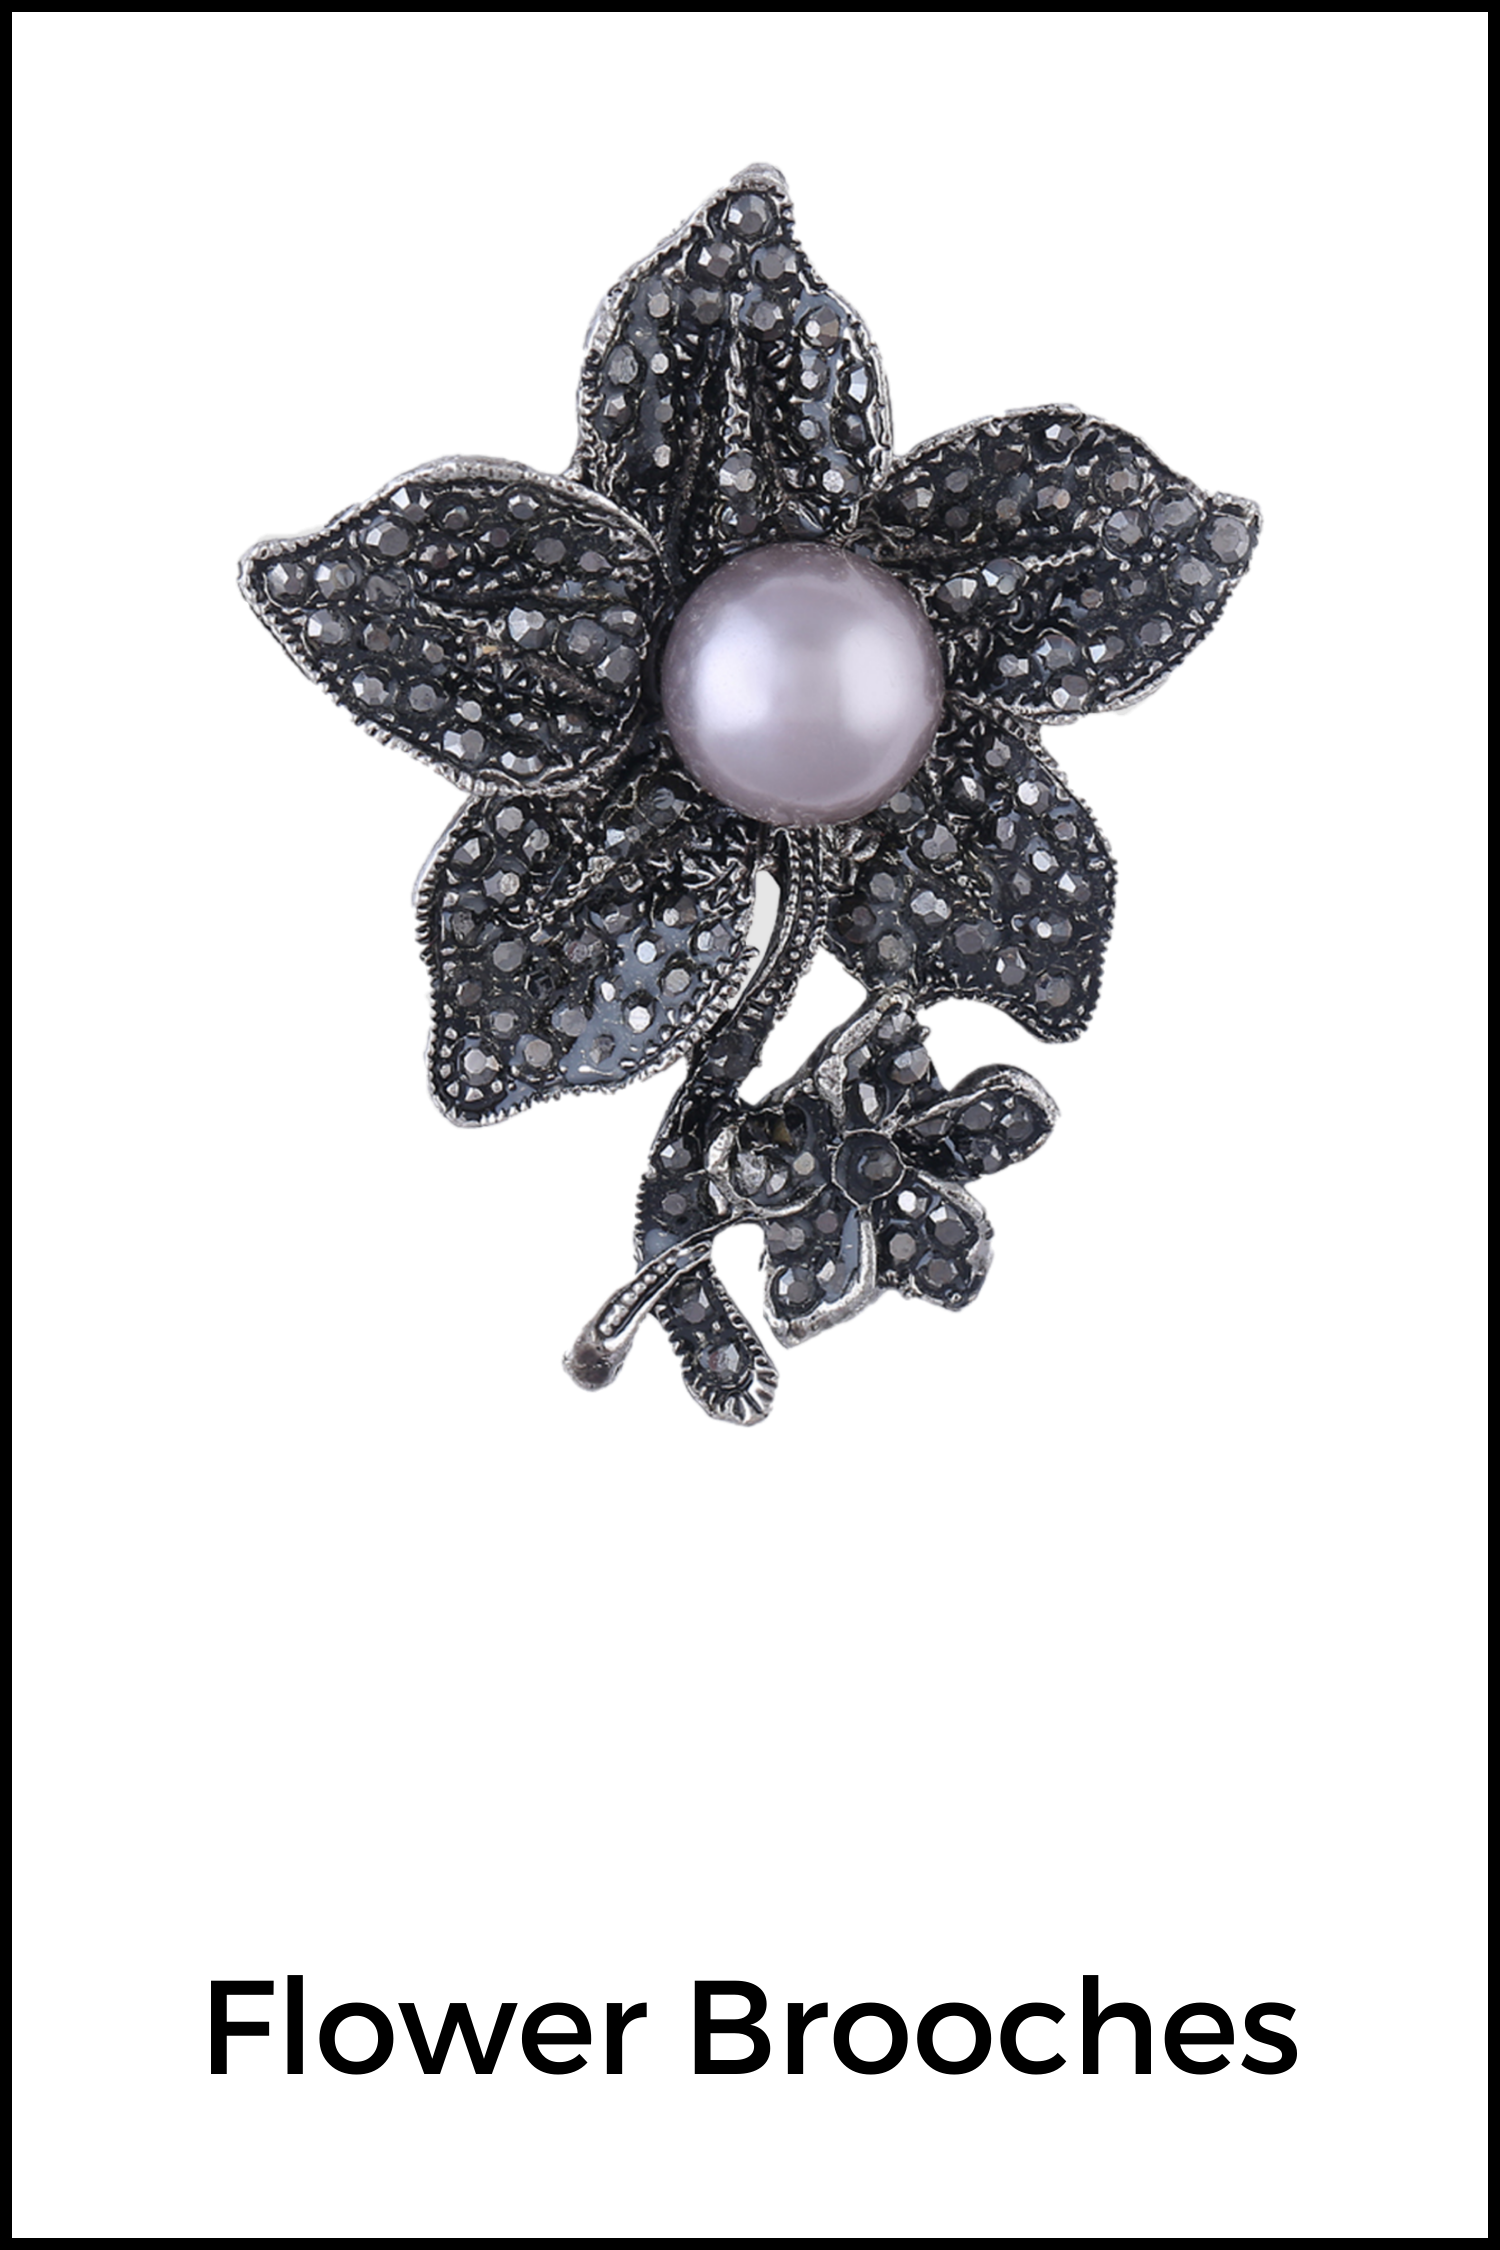 Top Quality Beautiful Flower Brooches Pins For Female Plum Blossom Brooch  Women 2018 Fashion Wedding Corsage Flowers Wholesale From Yj1188, $16.83